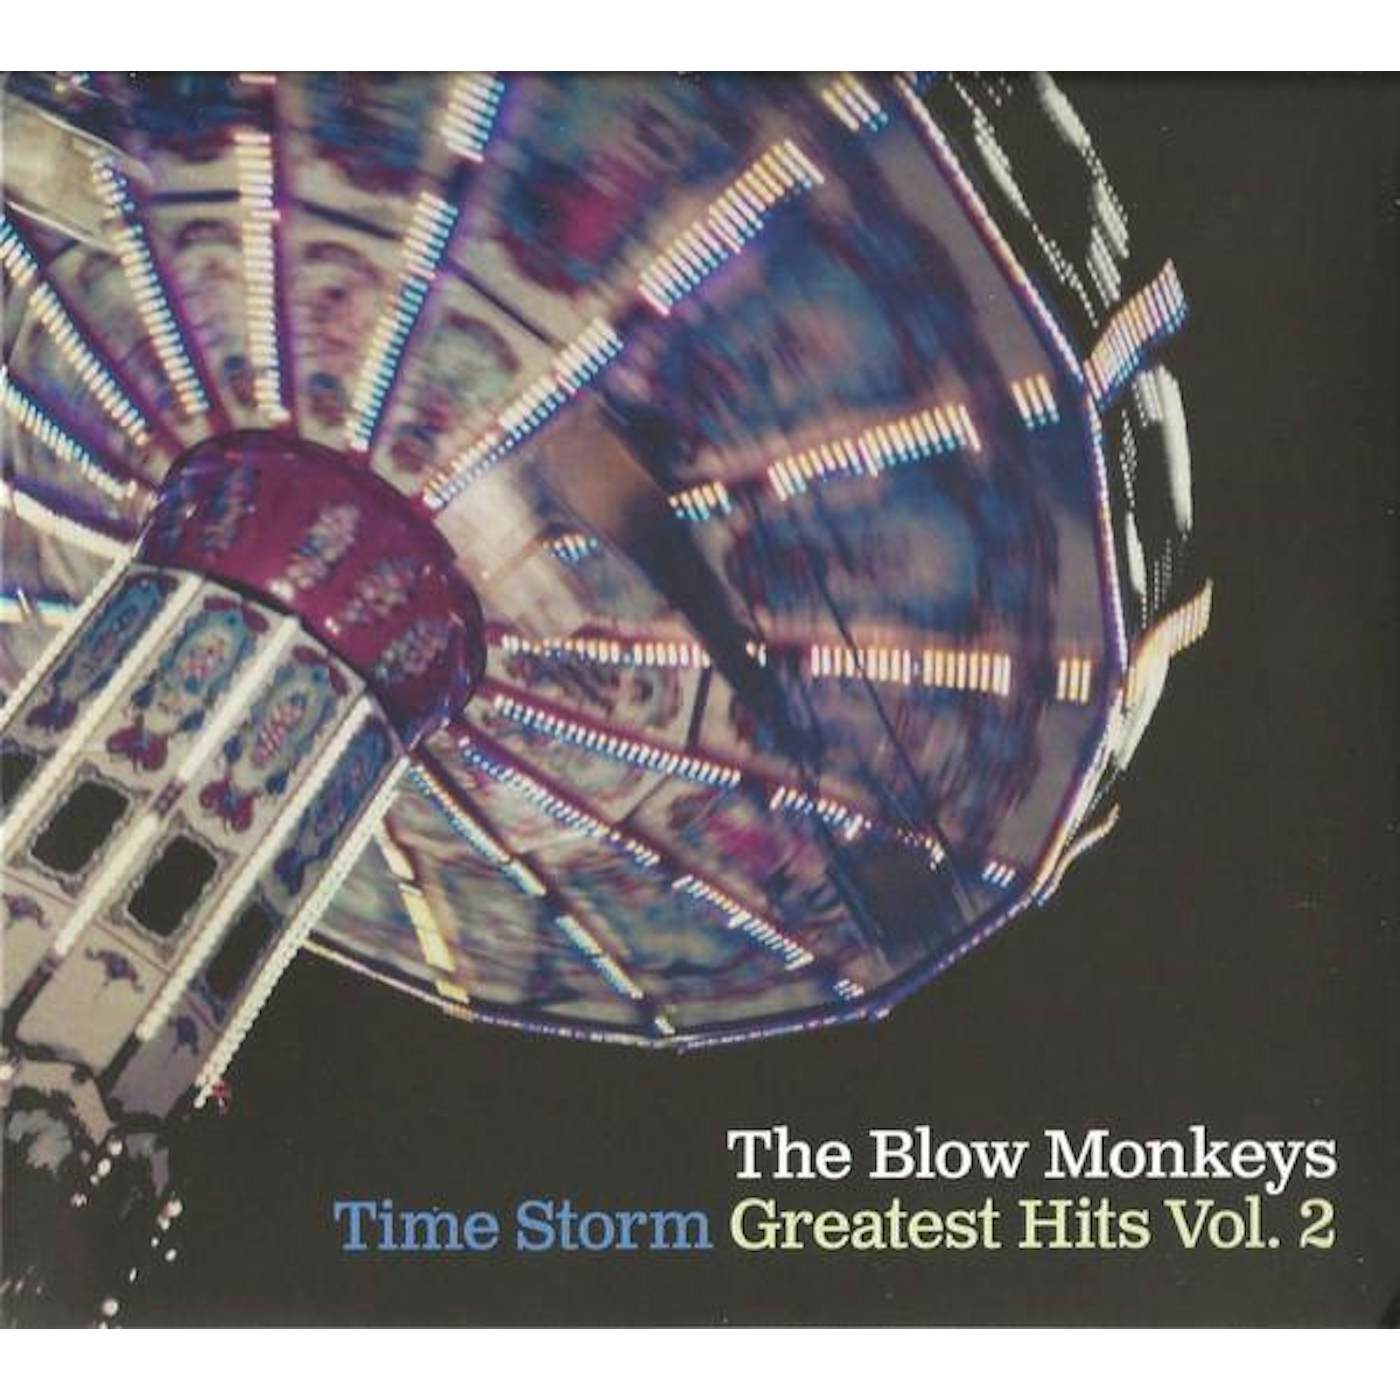 The Blow Monkeys TIME STORM - GREATEST HITS CD